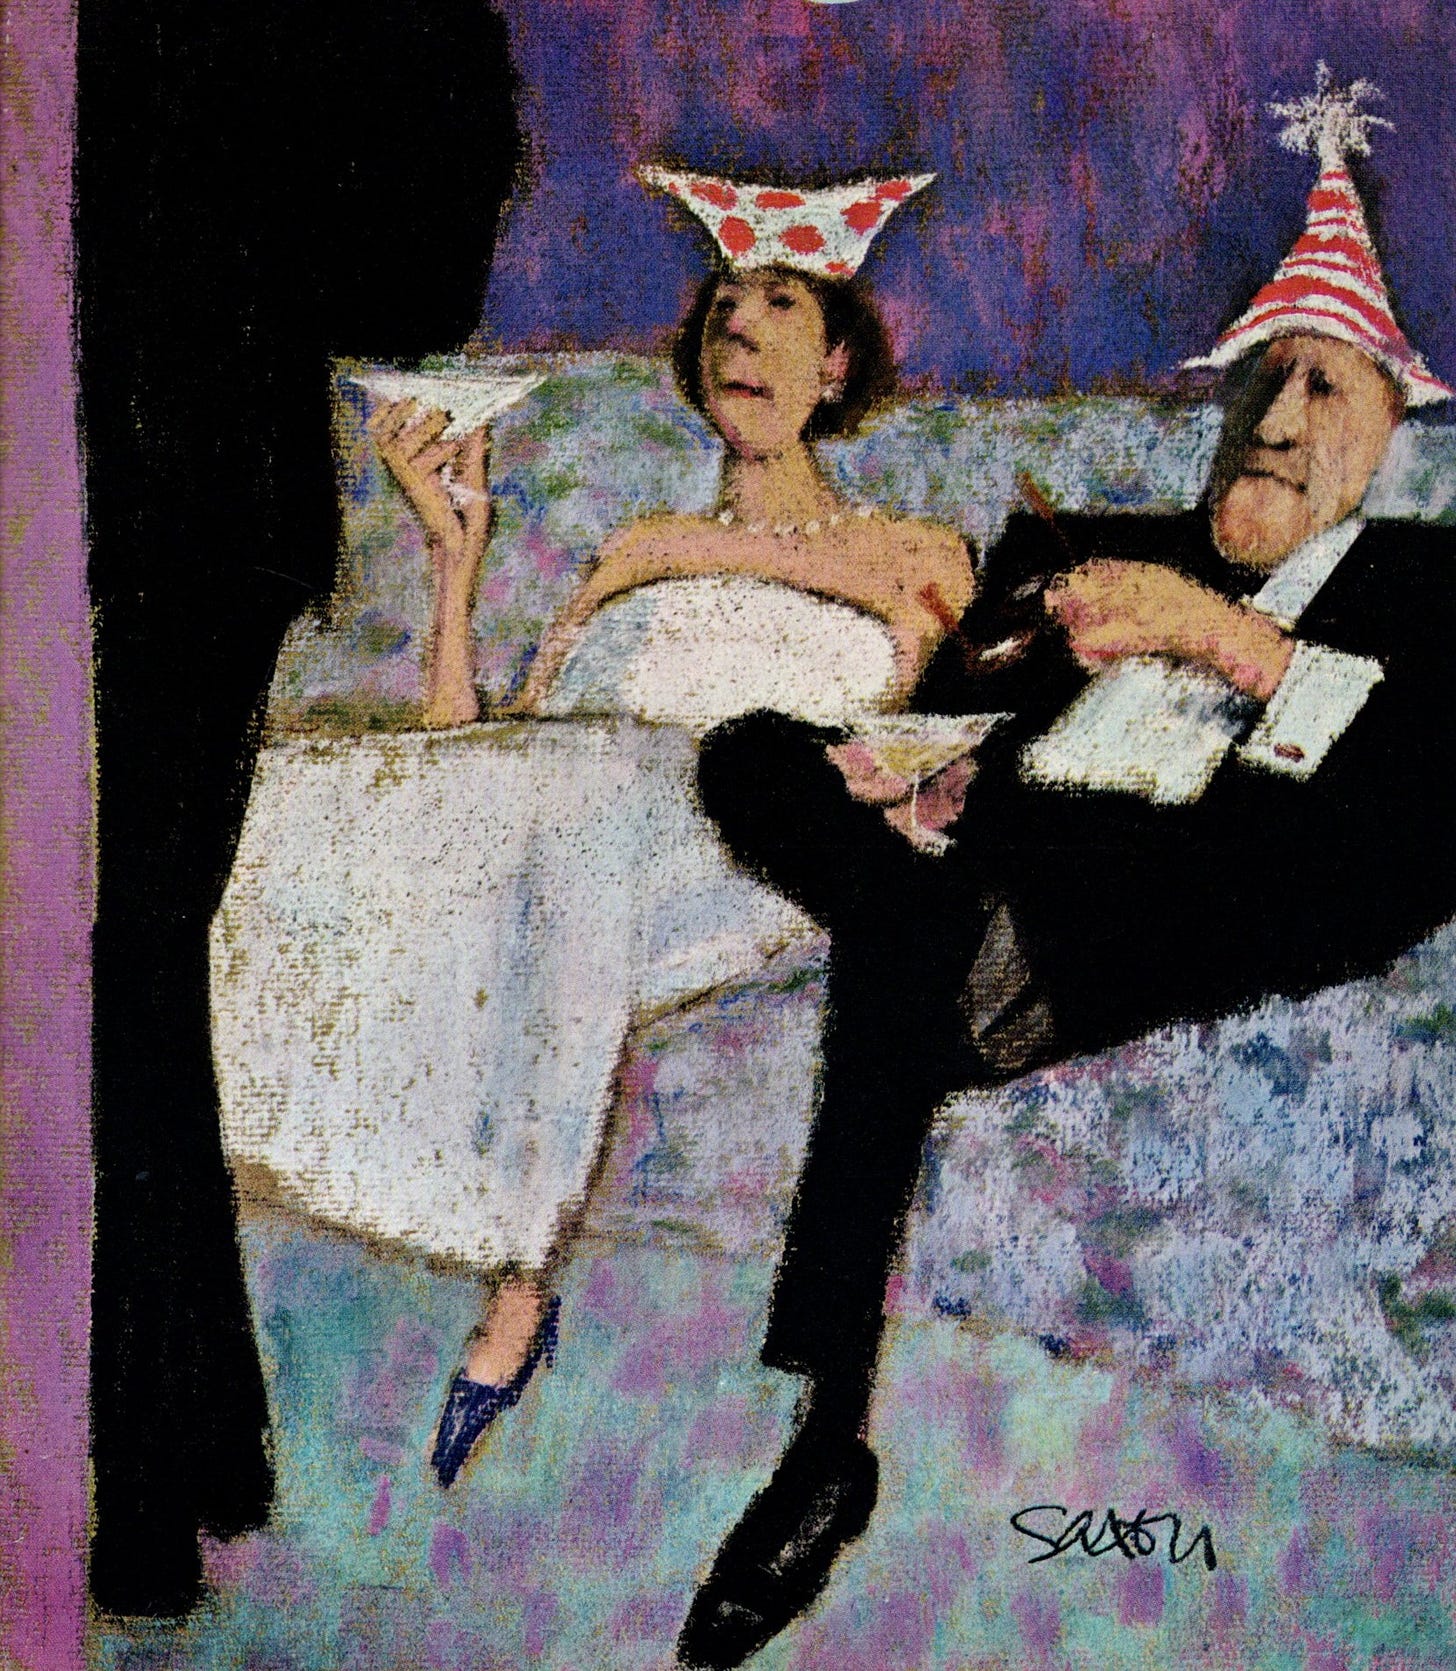 Brindille on X: "Ring in the New Year with some fun 🥂 (Cover for The New  Yorker, december 1966) © Charles Saxon https://t.co/K7KgK5asCU" / X